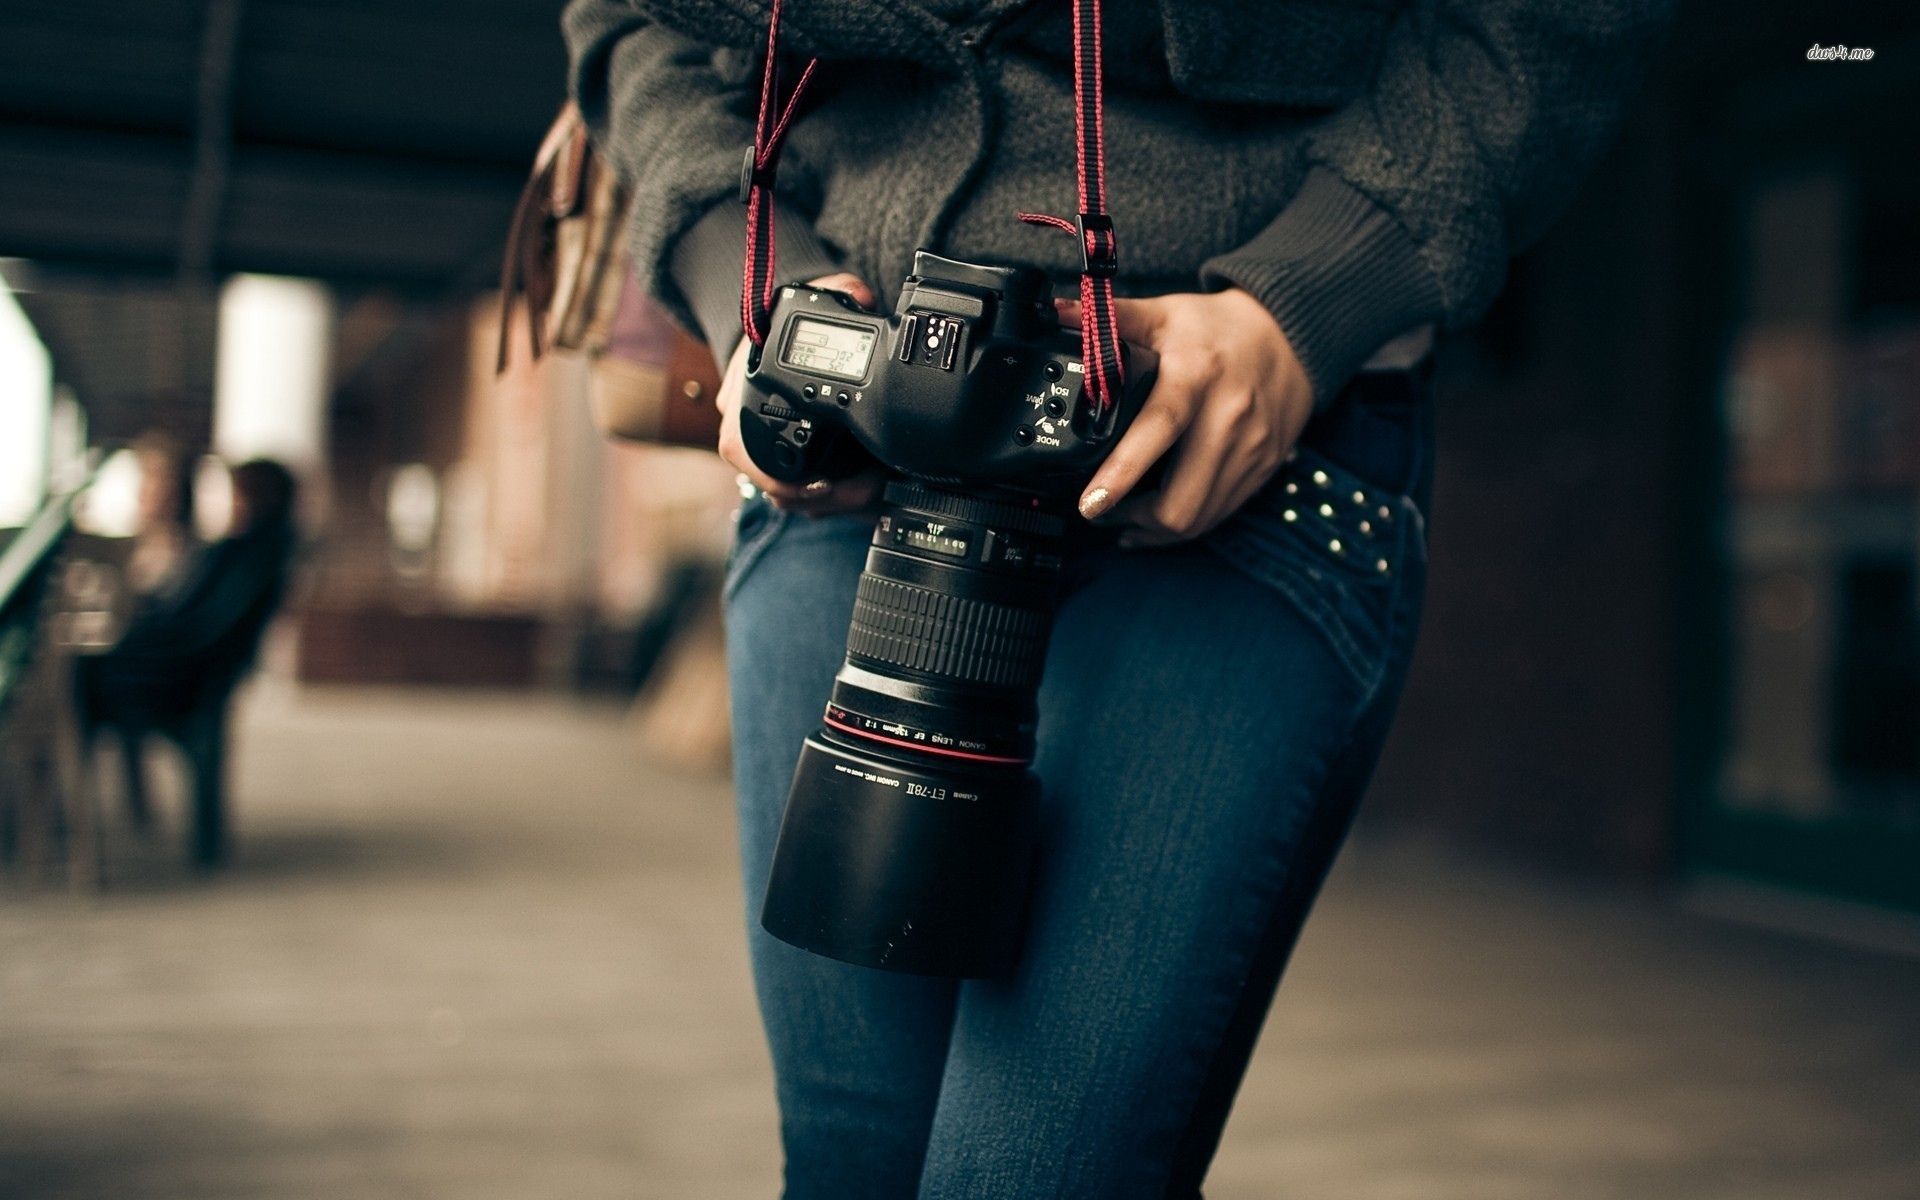 Woman holding a camera wallpaper - Photography wallpapers - #18441